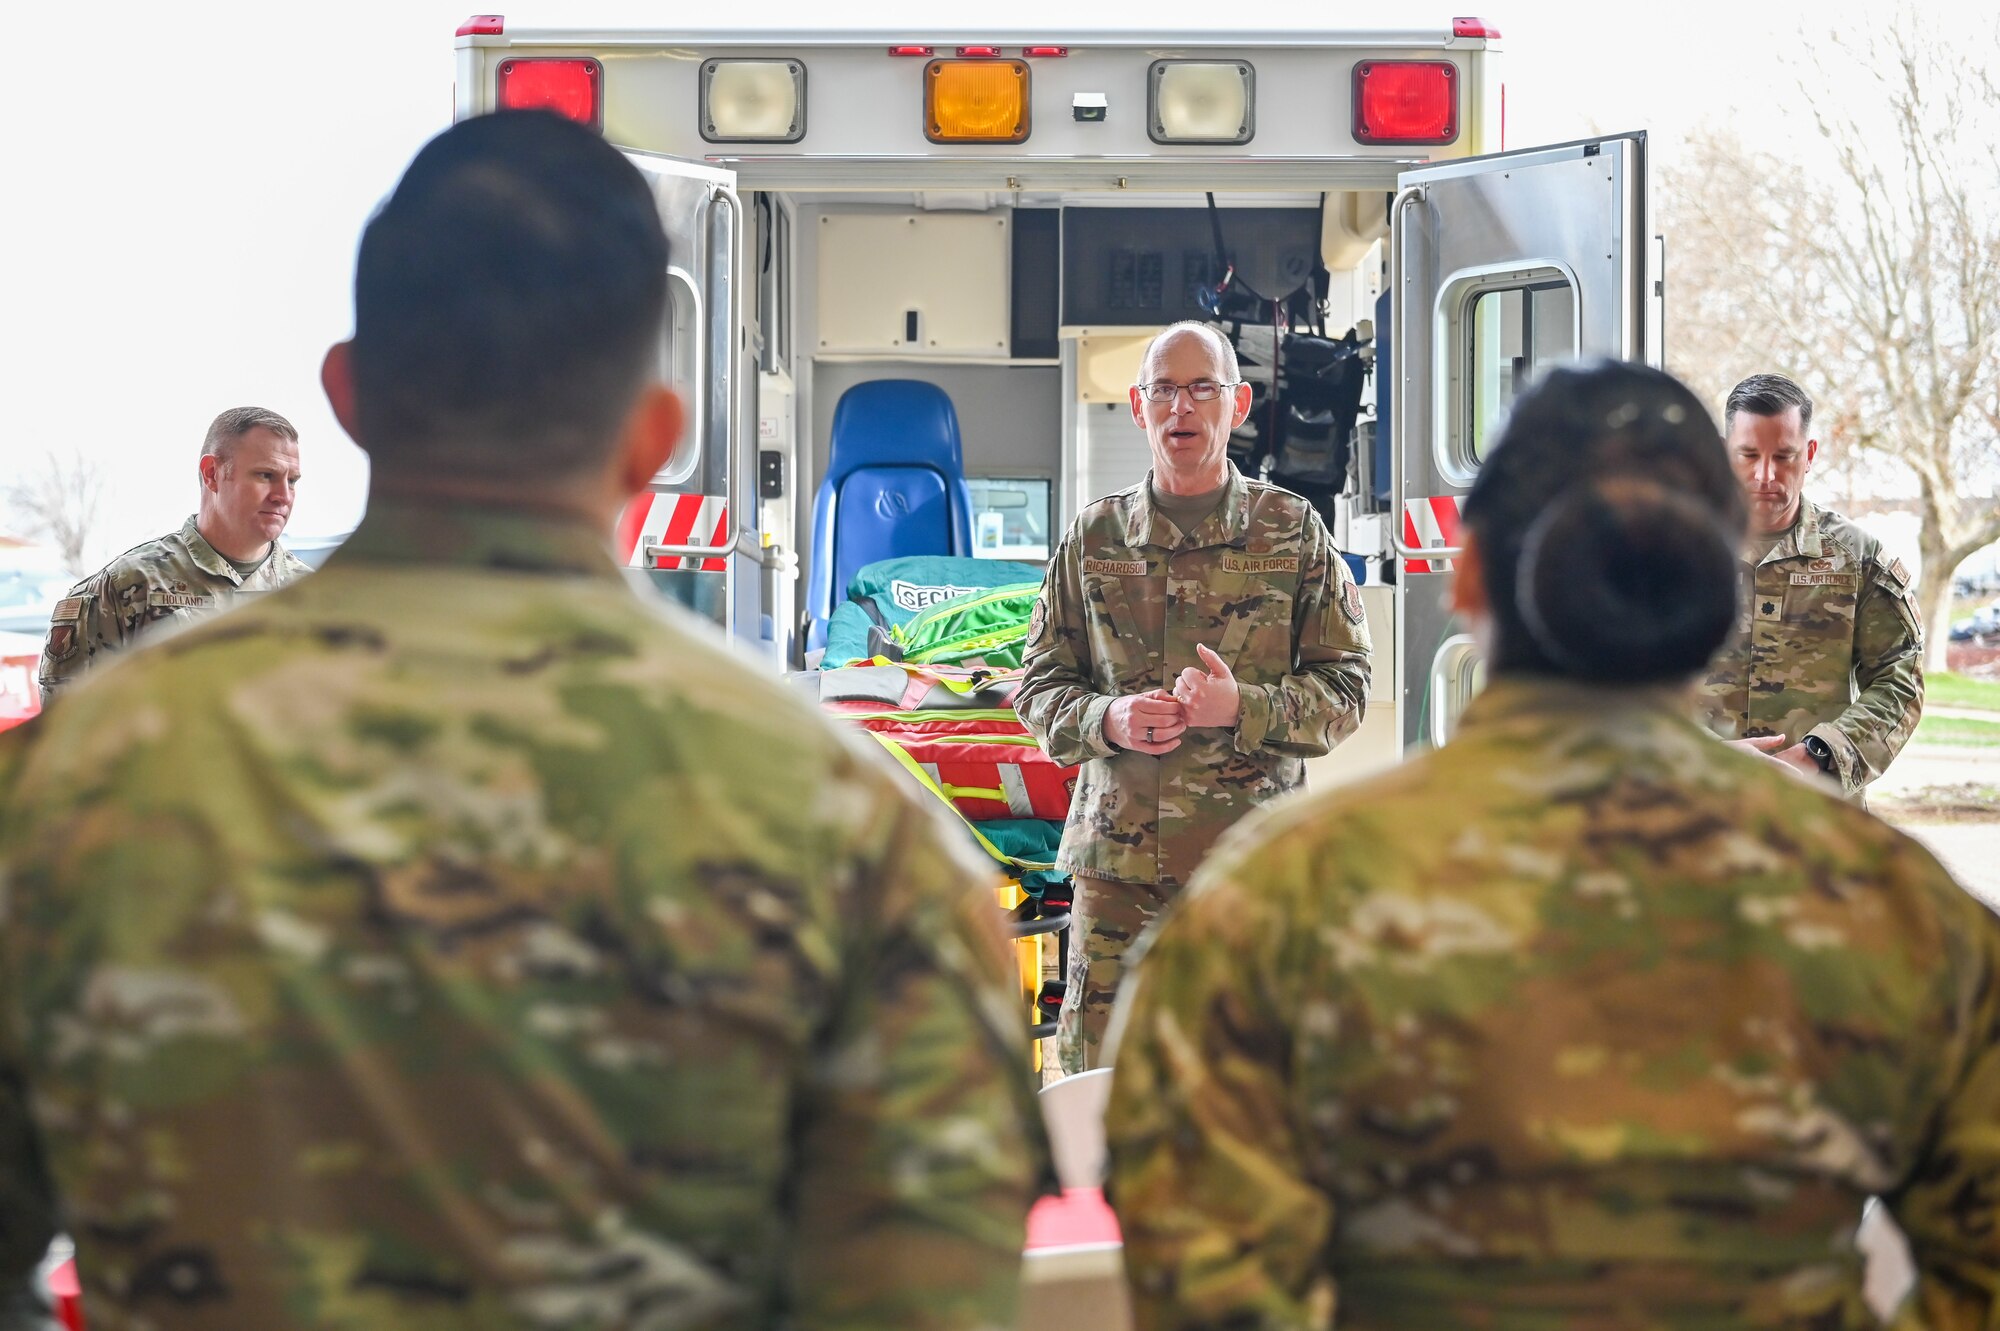 (Center) Gen. Duke Z. Richardson, Air Force Materiel Command commander, talks to members of 775th Civil Engineer Squadron Fire and Emergency Services, during a base visit April 12, 2023, at Hill Air Force Base, Utah.